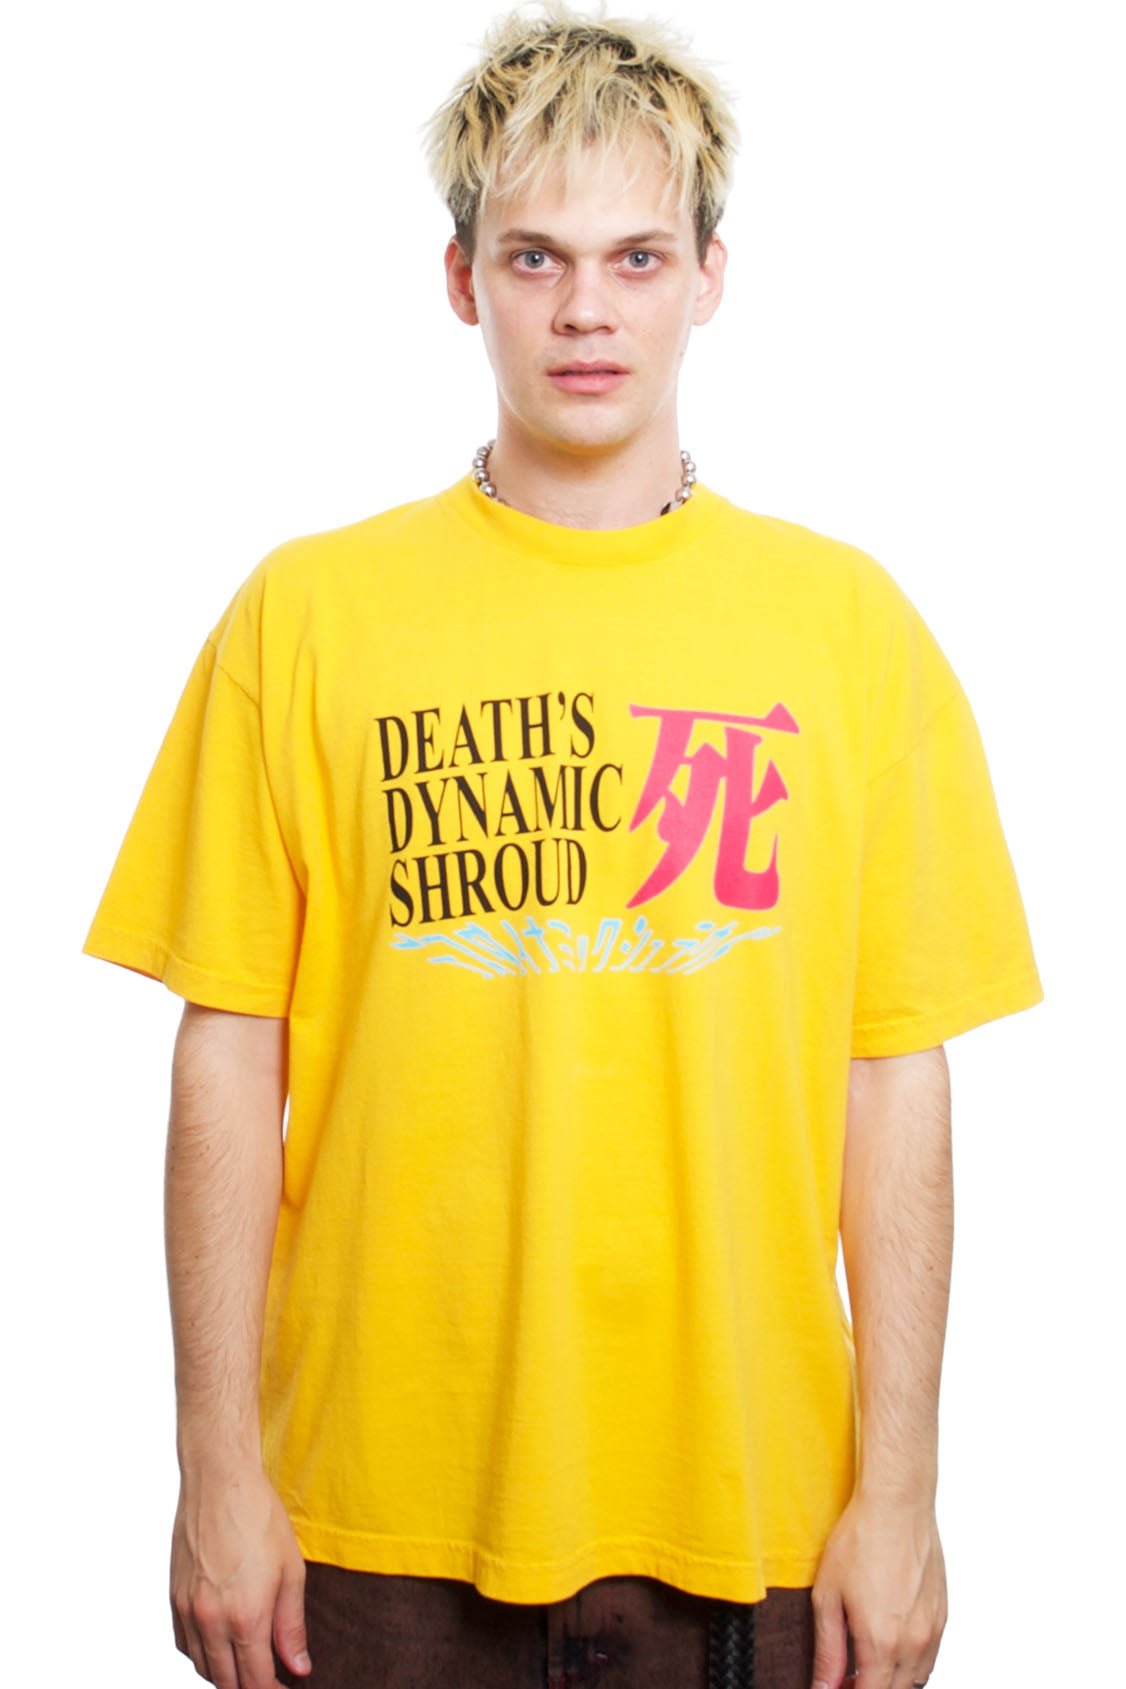 death's dynamic shroud - Kanji T-Shirt - 100% Electronica Official Store (Photo 1)